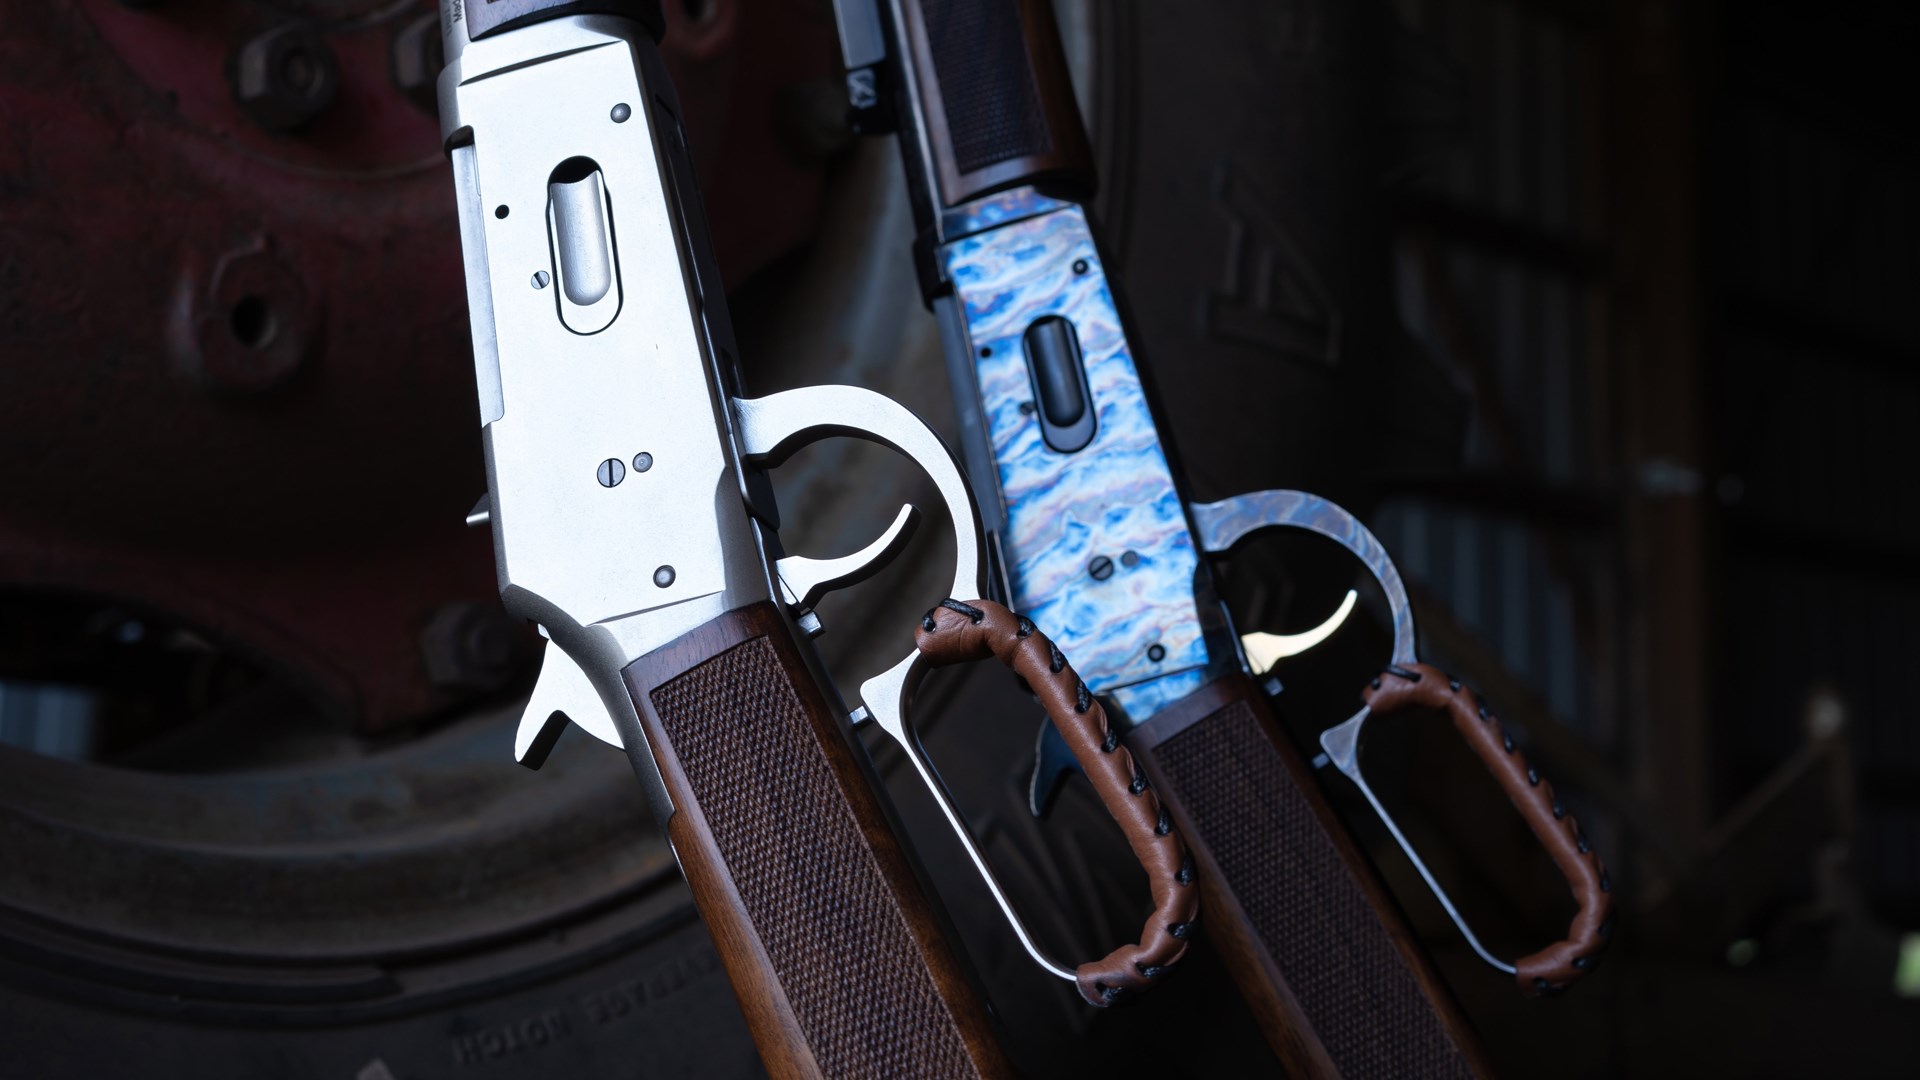 A closeup shot of two TriStar Arms LR94 lever-action shotgun receivers shown on a dark background, one with a nickel finish and another with a case-hardened finish.